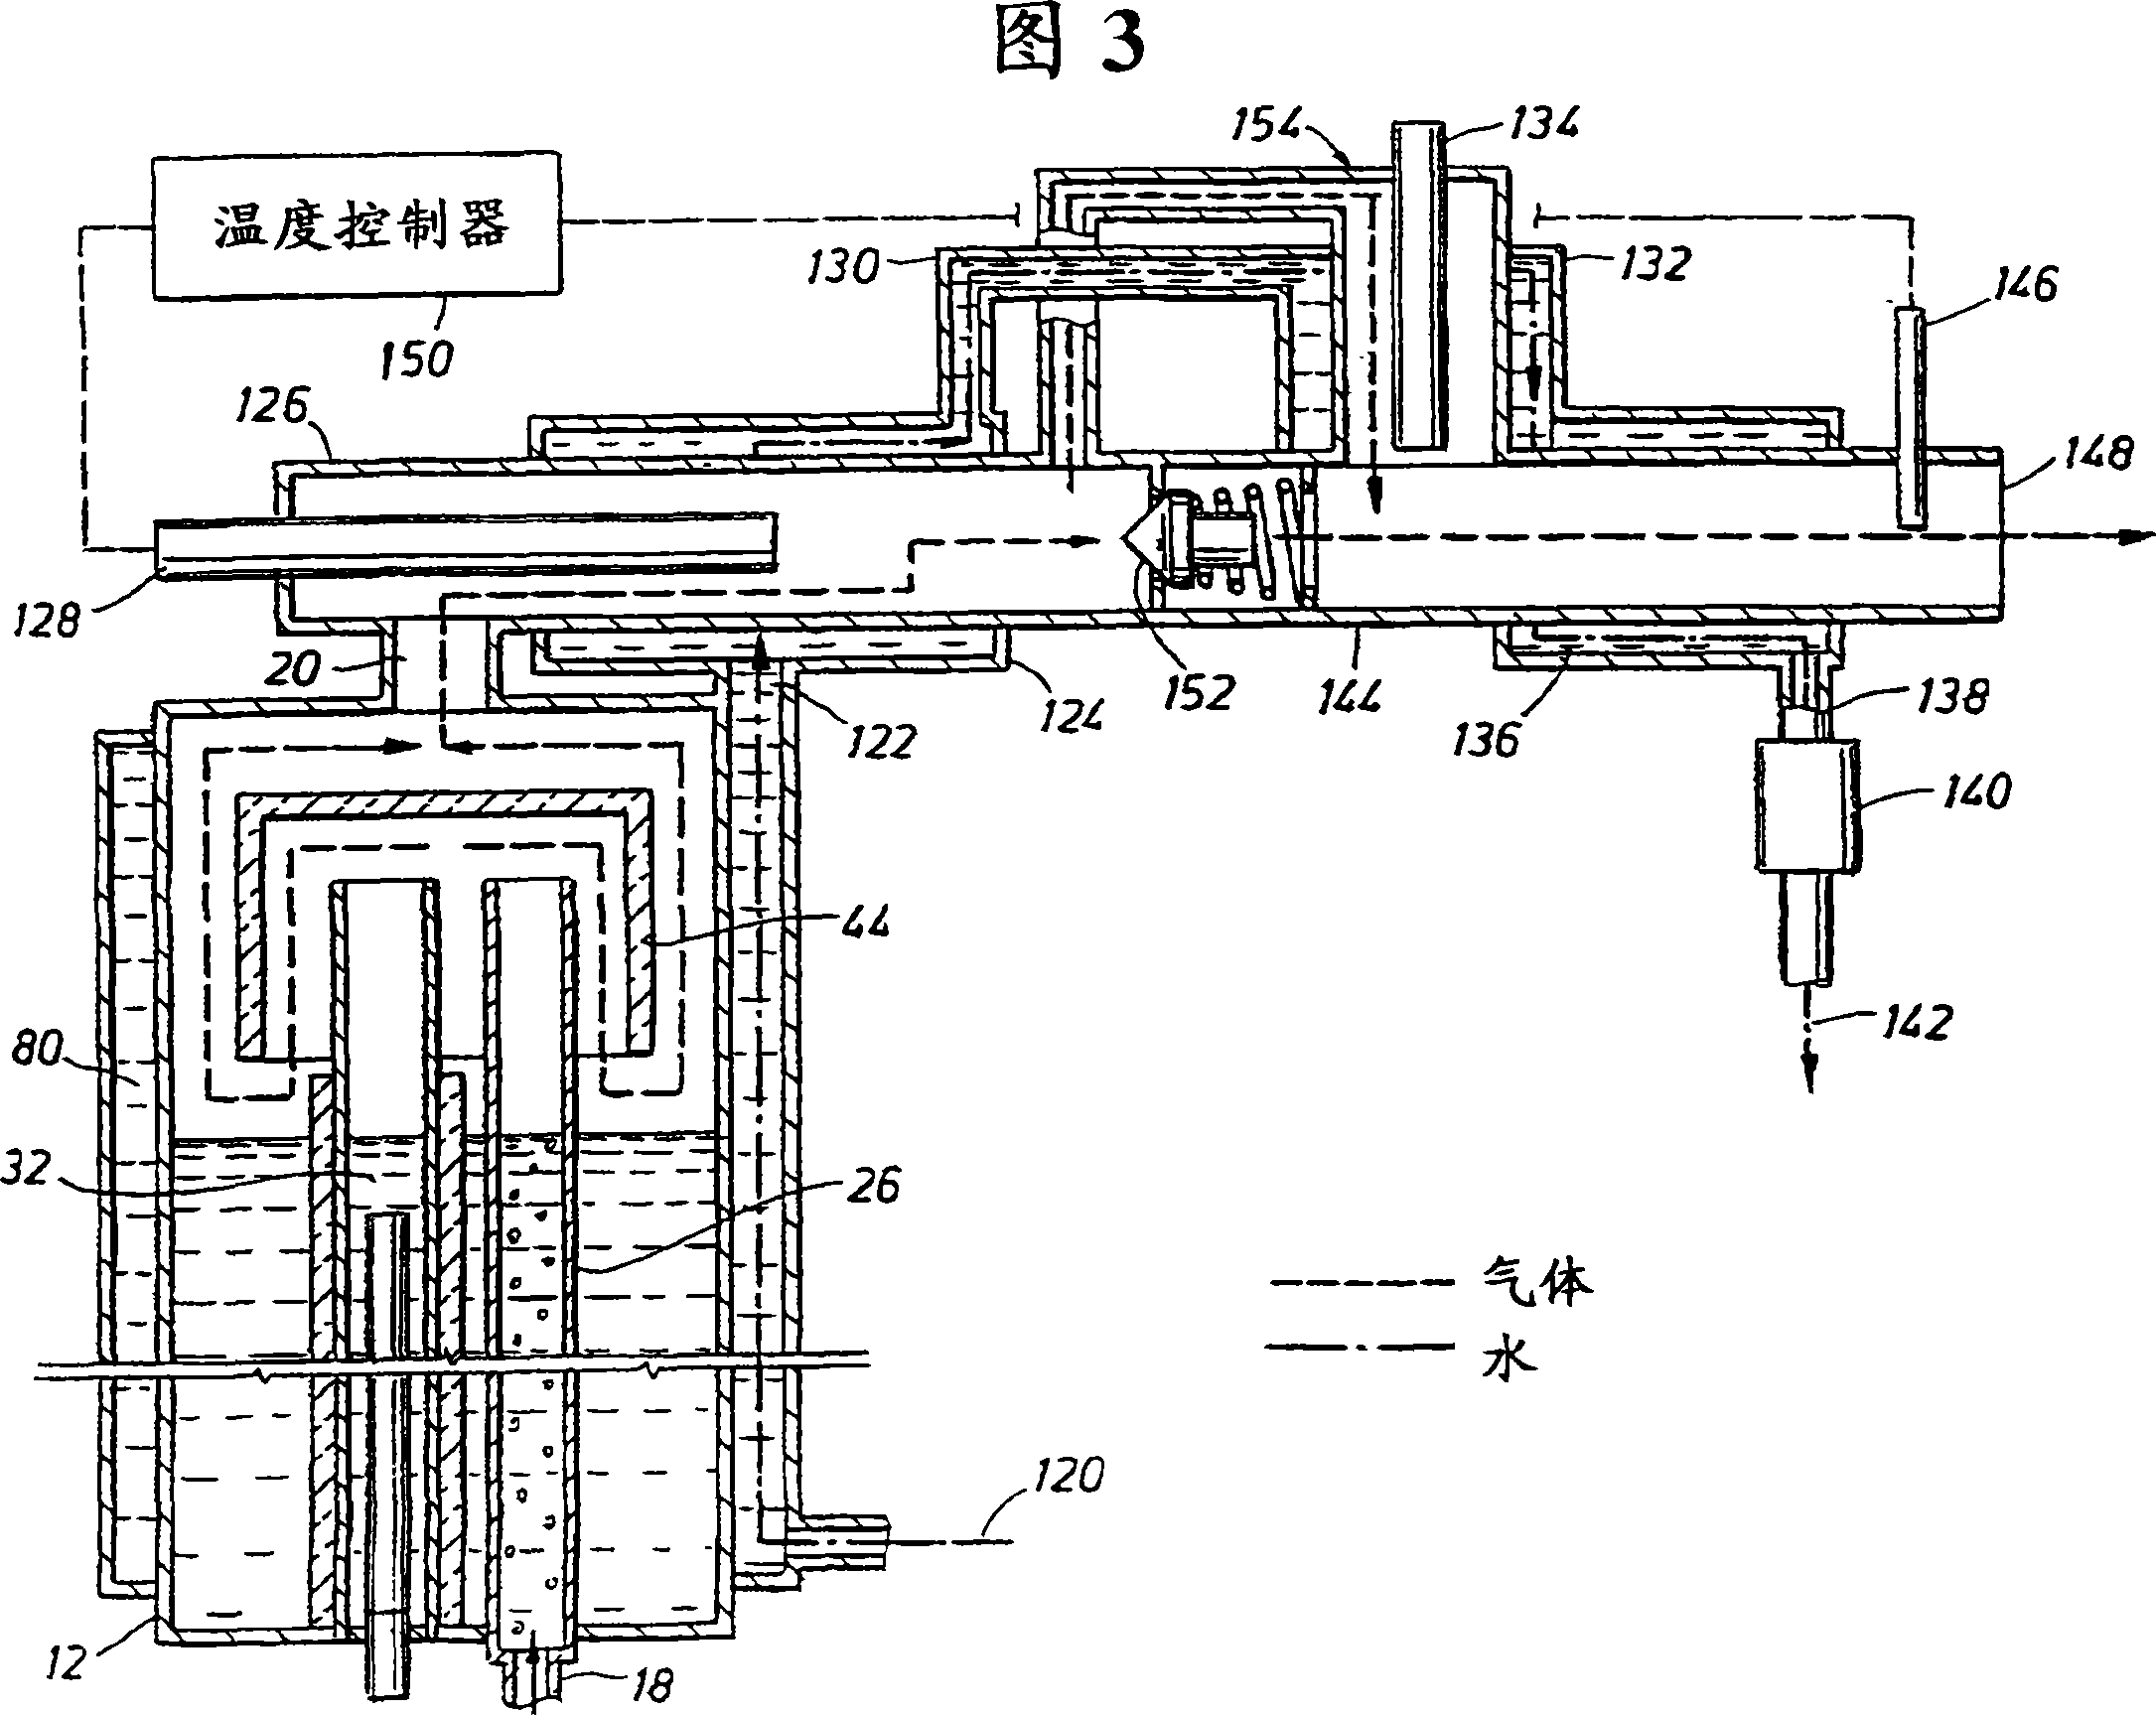 Dew-point humididier and temperature control for corresponding gas